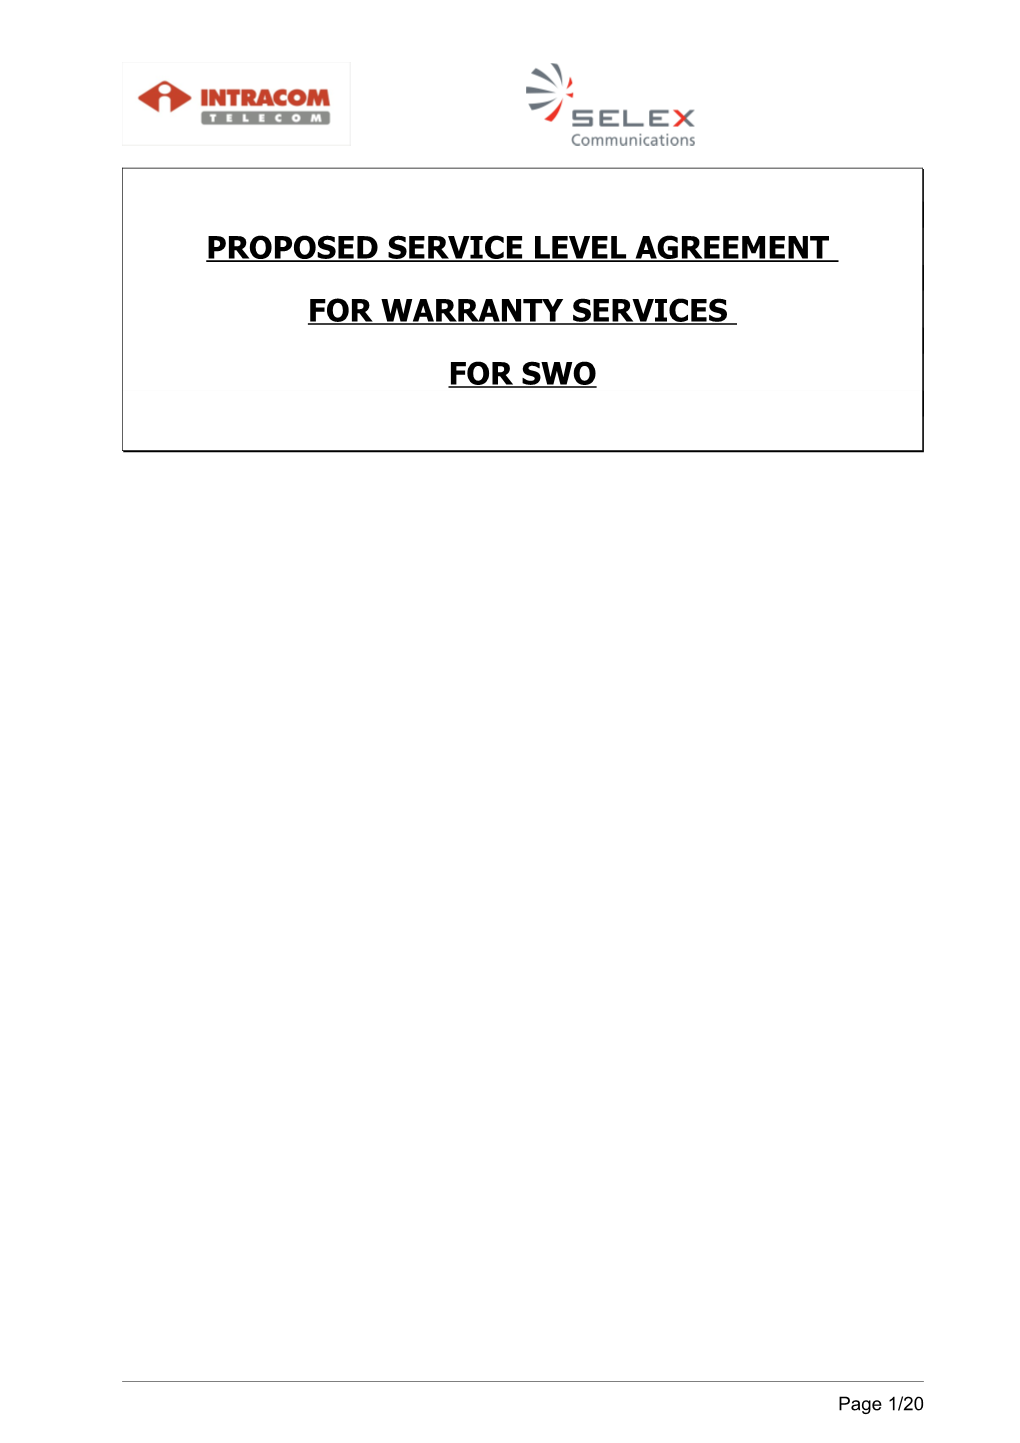 Proposed Service Level Agreement